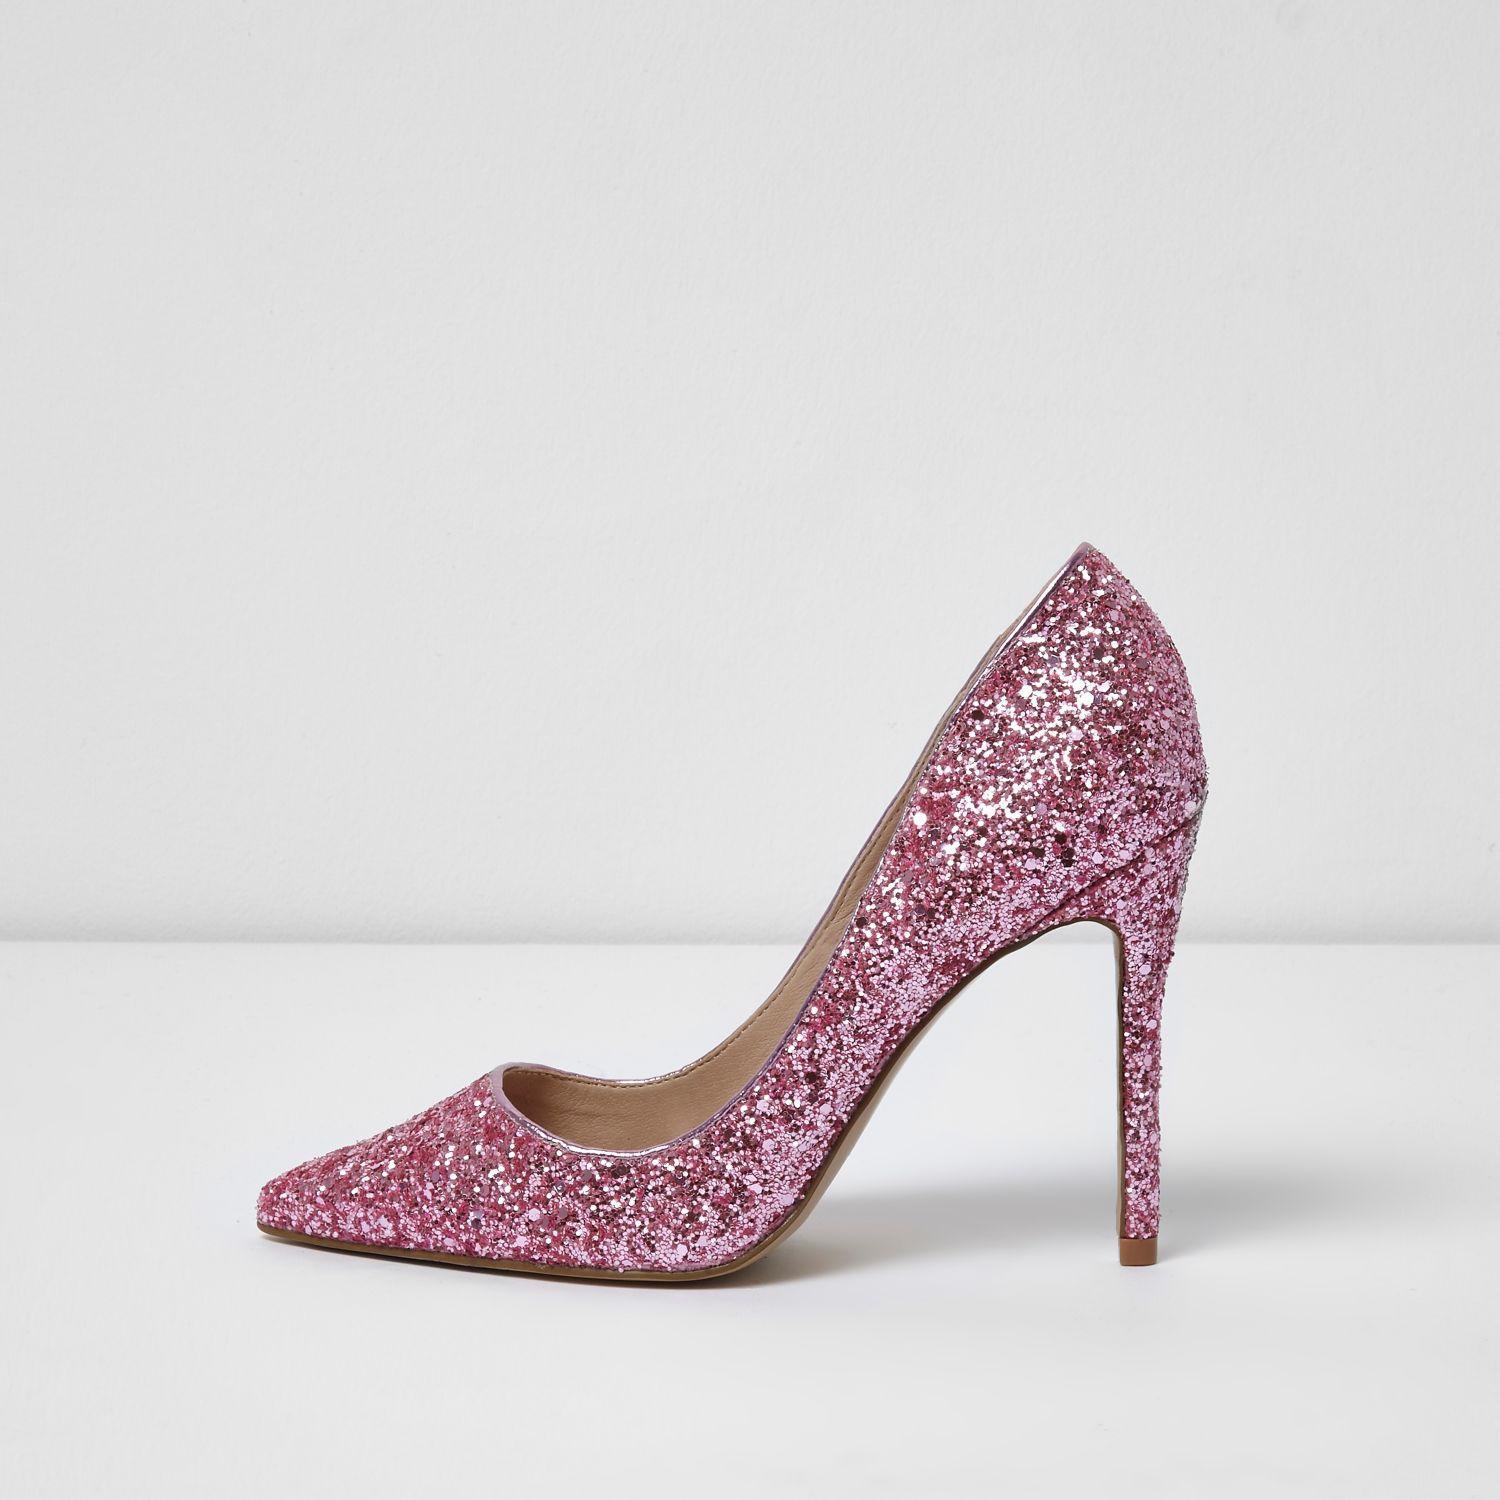 River Island Pink Glitter Court Shoes 